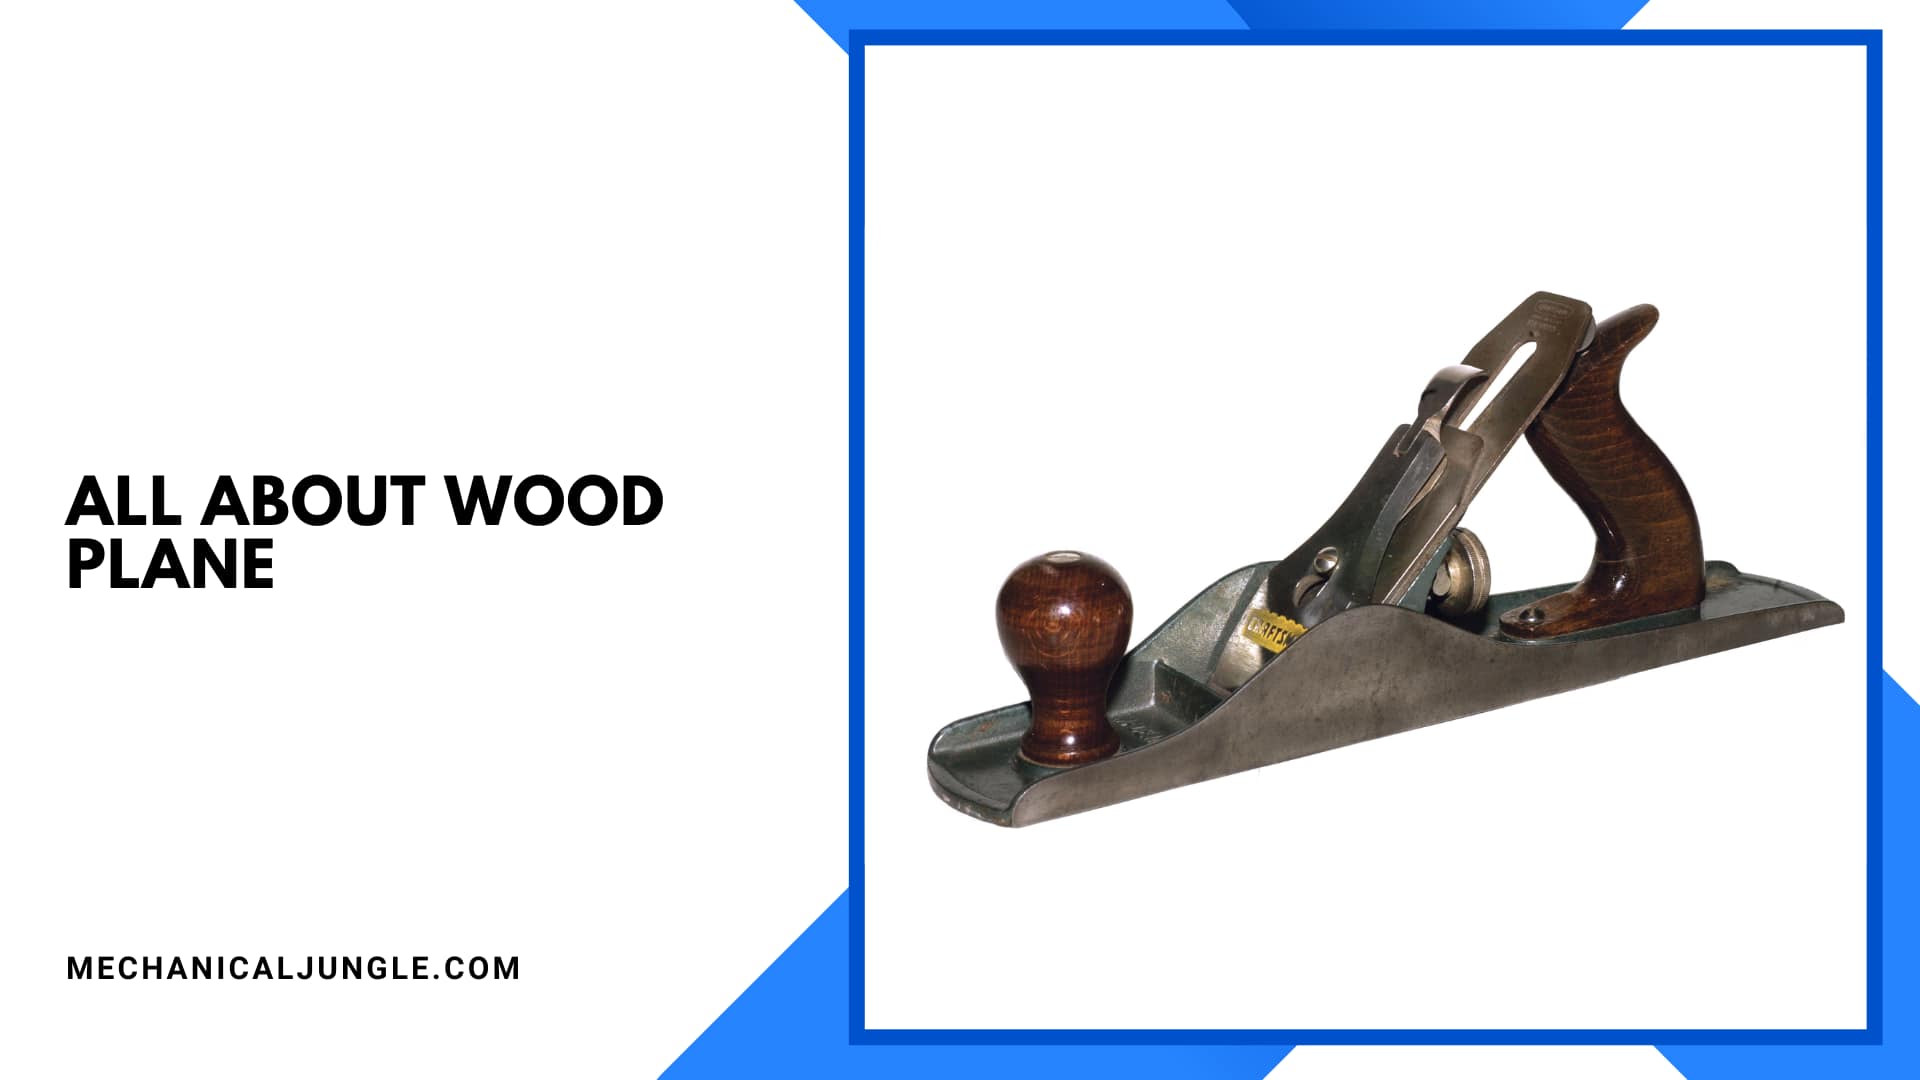 All About Wood Plane